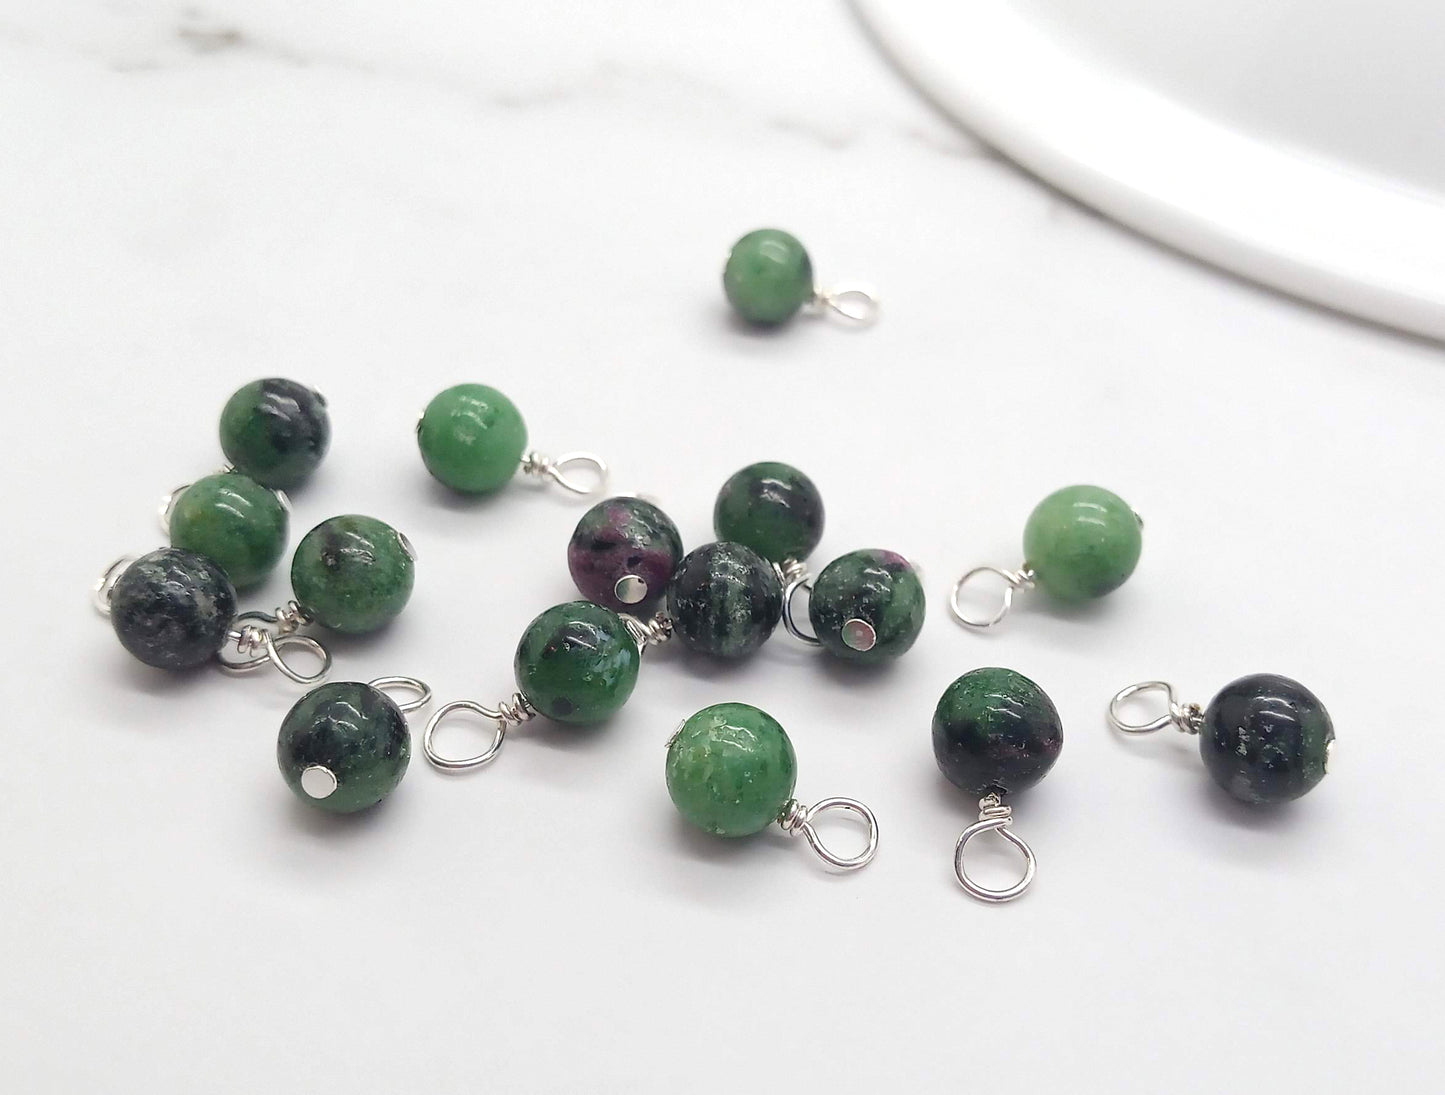 Zoisite Ruby 6mm Bead Charms, Gemstone Dangles - Adorabilities Charms & Trinkets